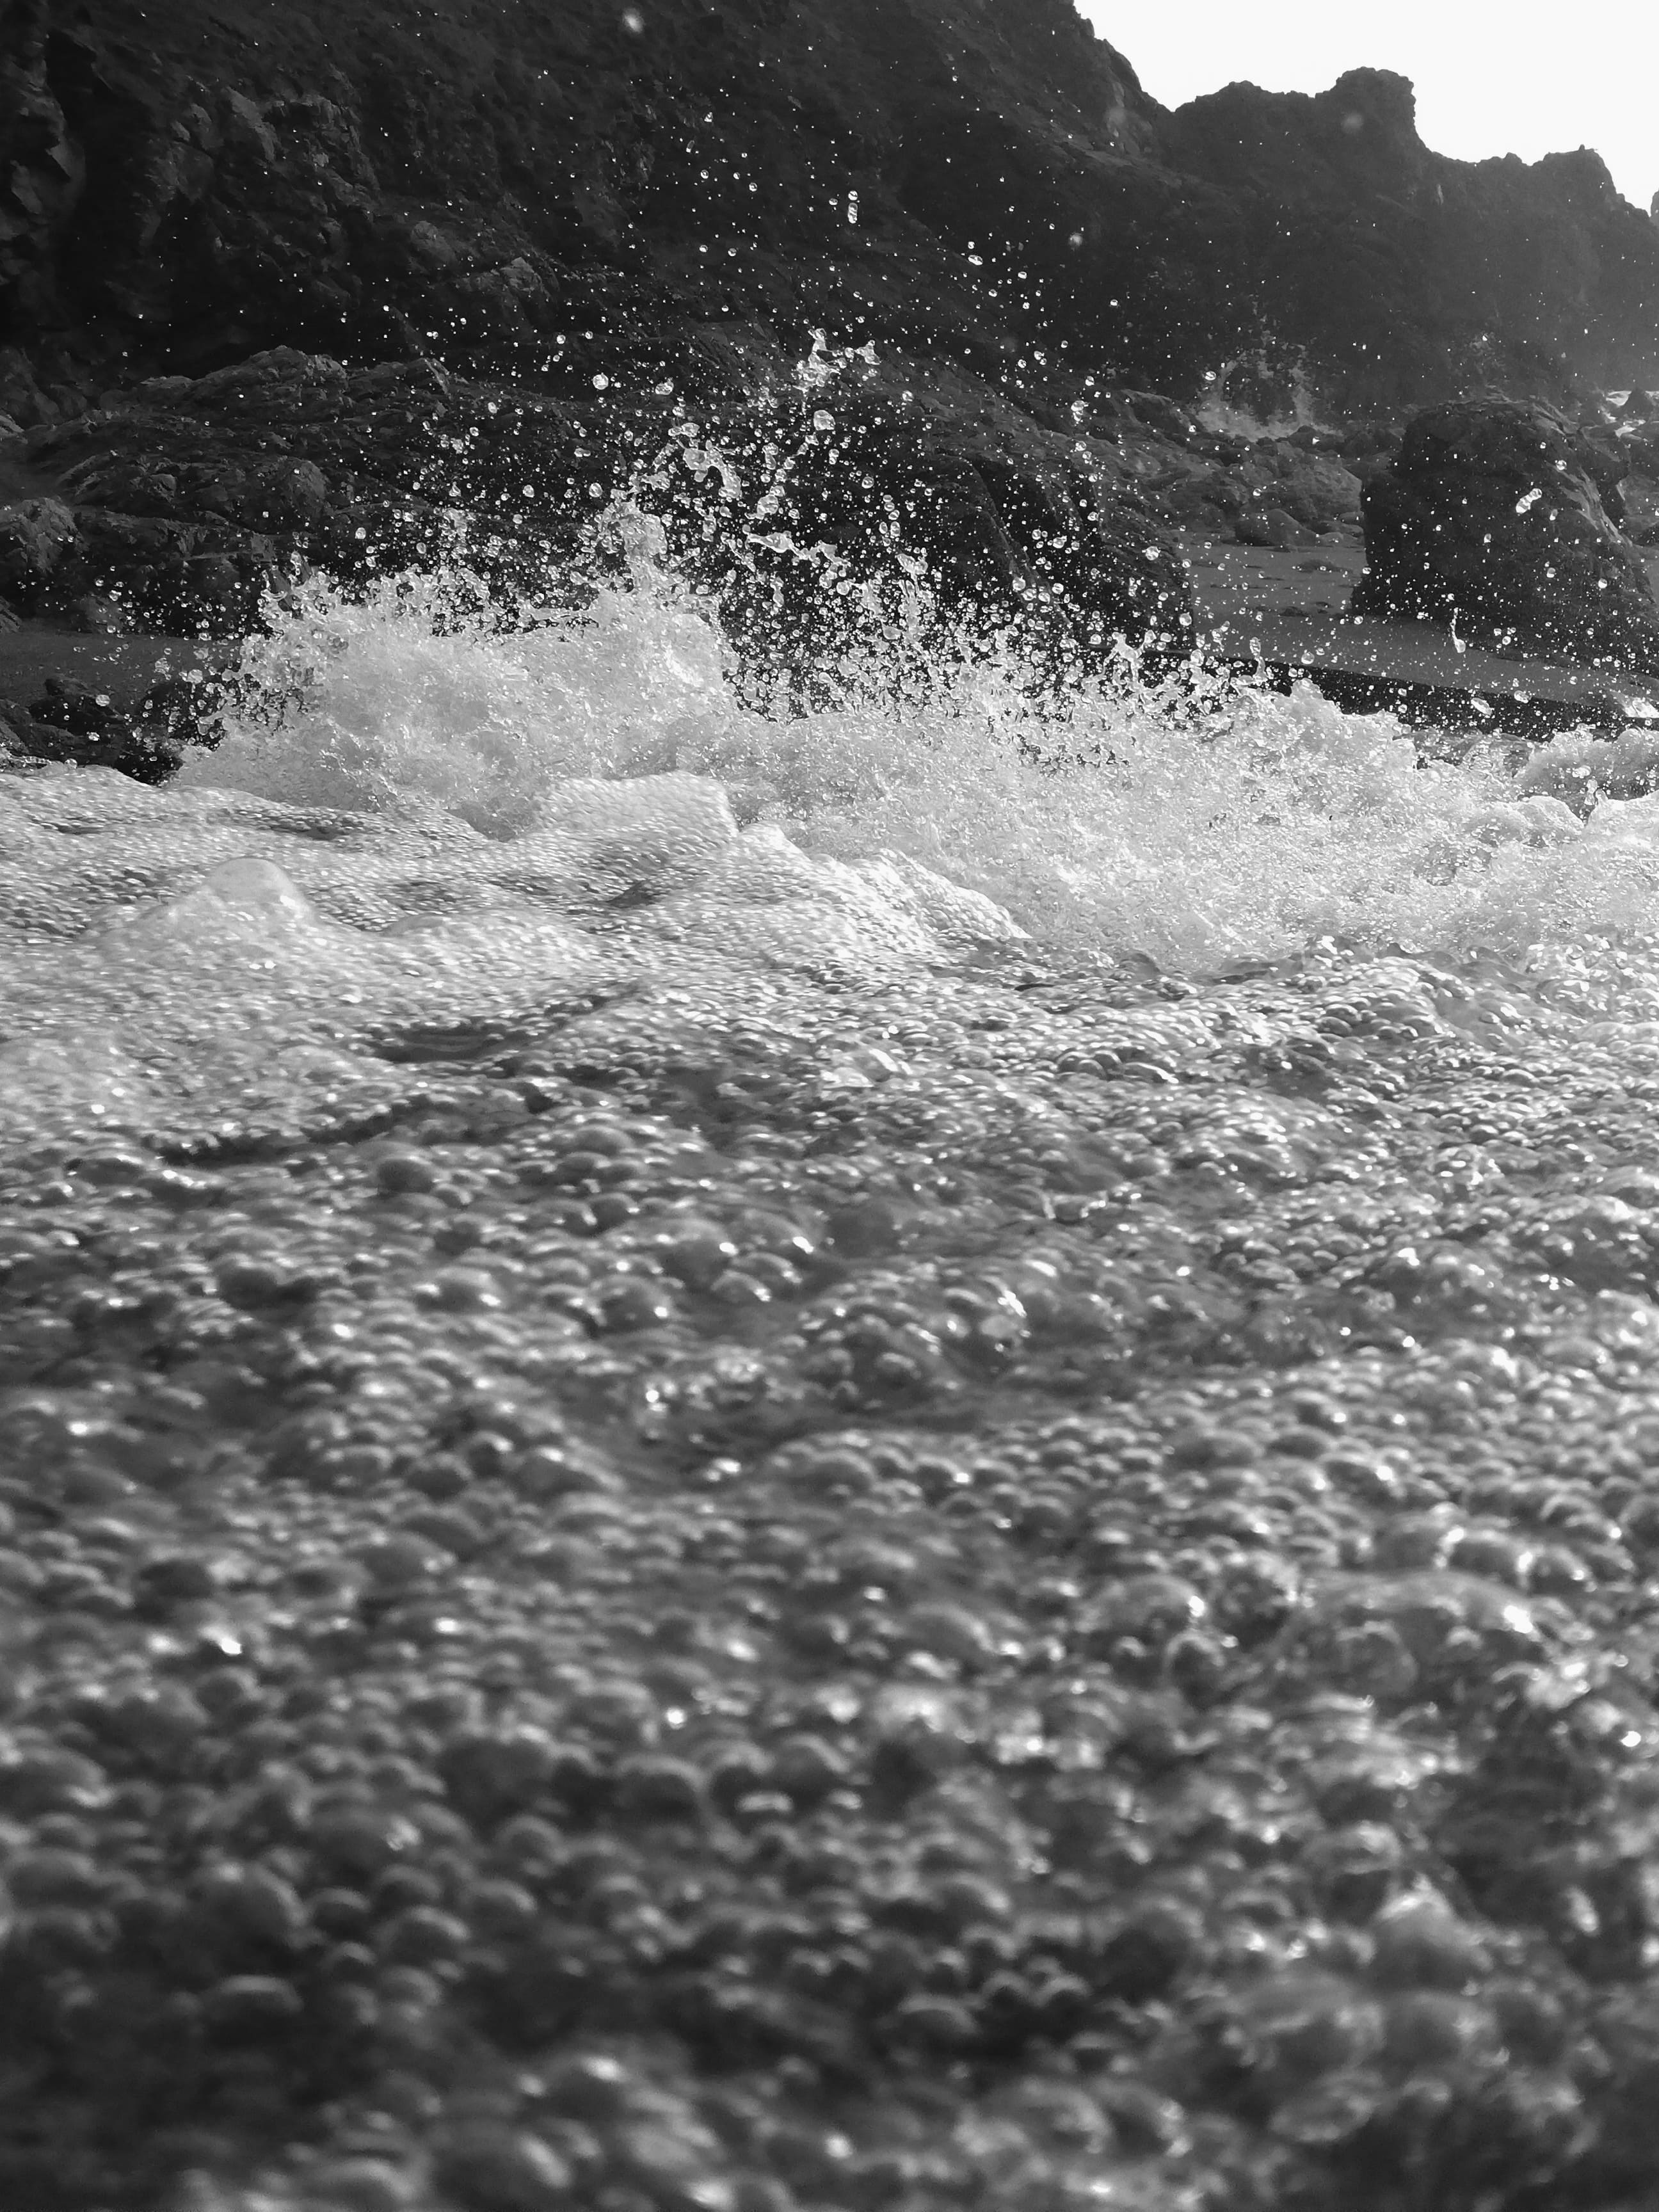 A shot of some sea foam and splashing water in a stream going into the sea